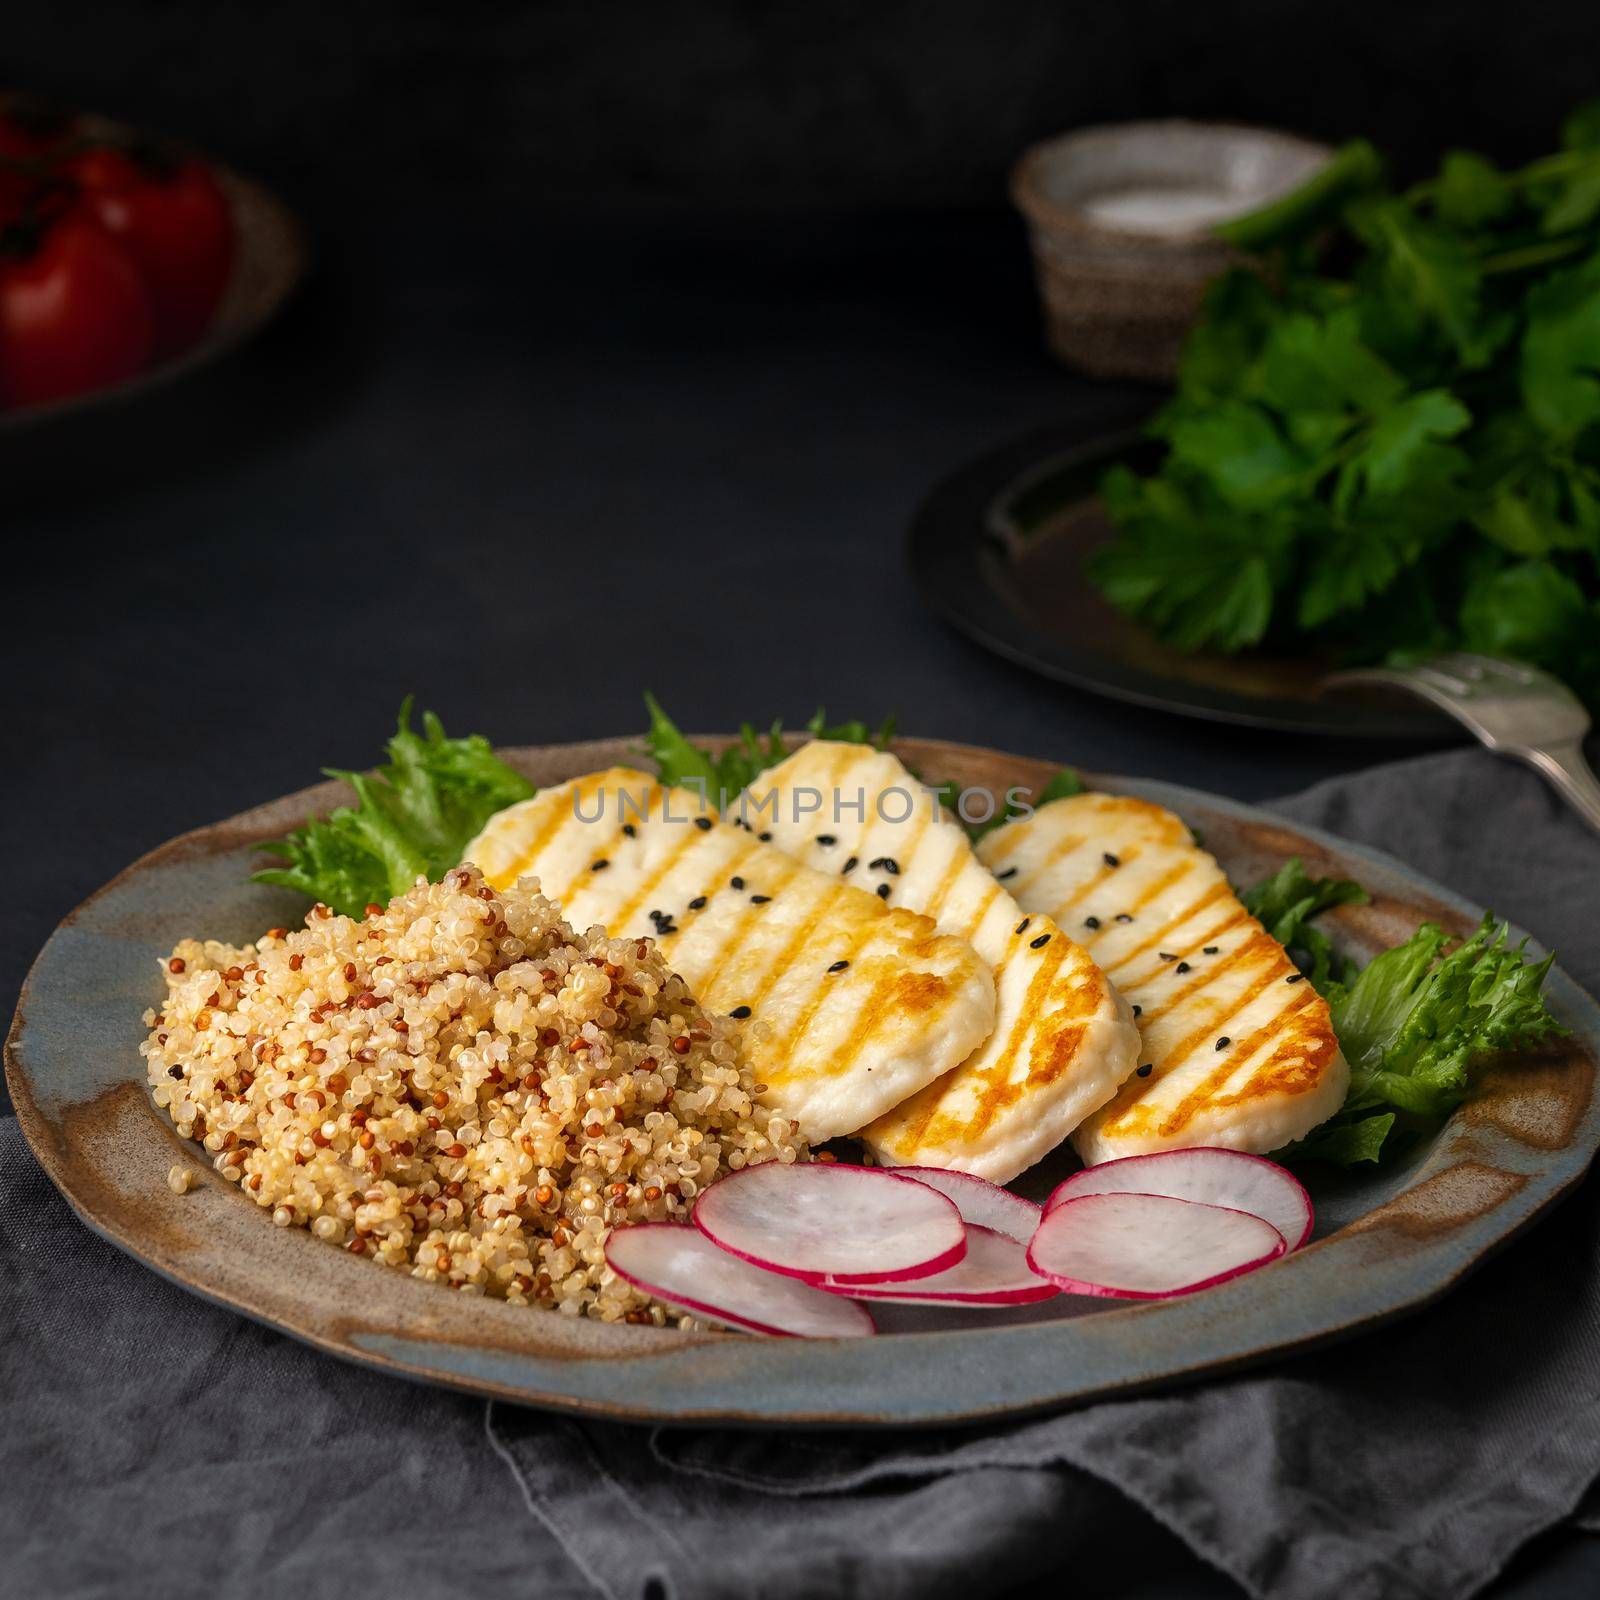 Halloumi, grilled cheese with quinoa, salad, radish. Balanced diet on dark background, side view by NataBene